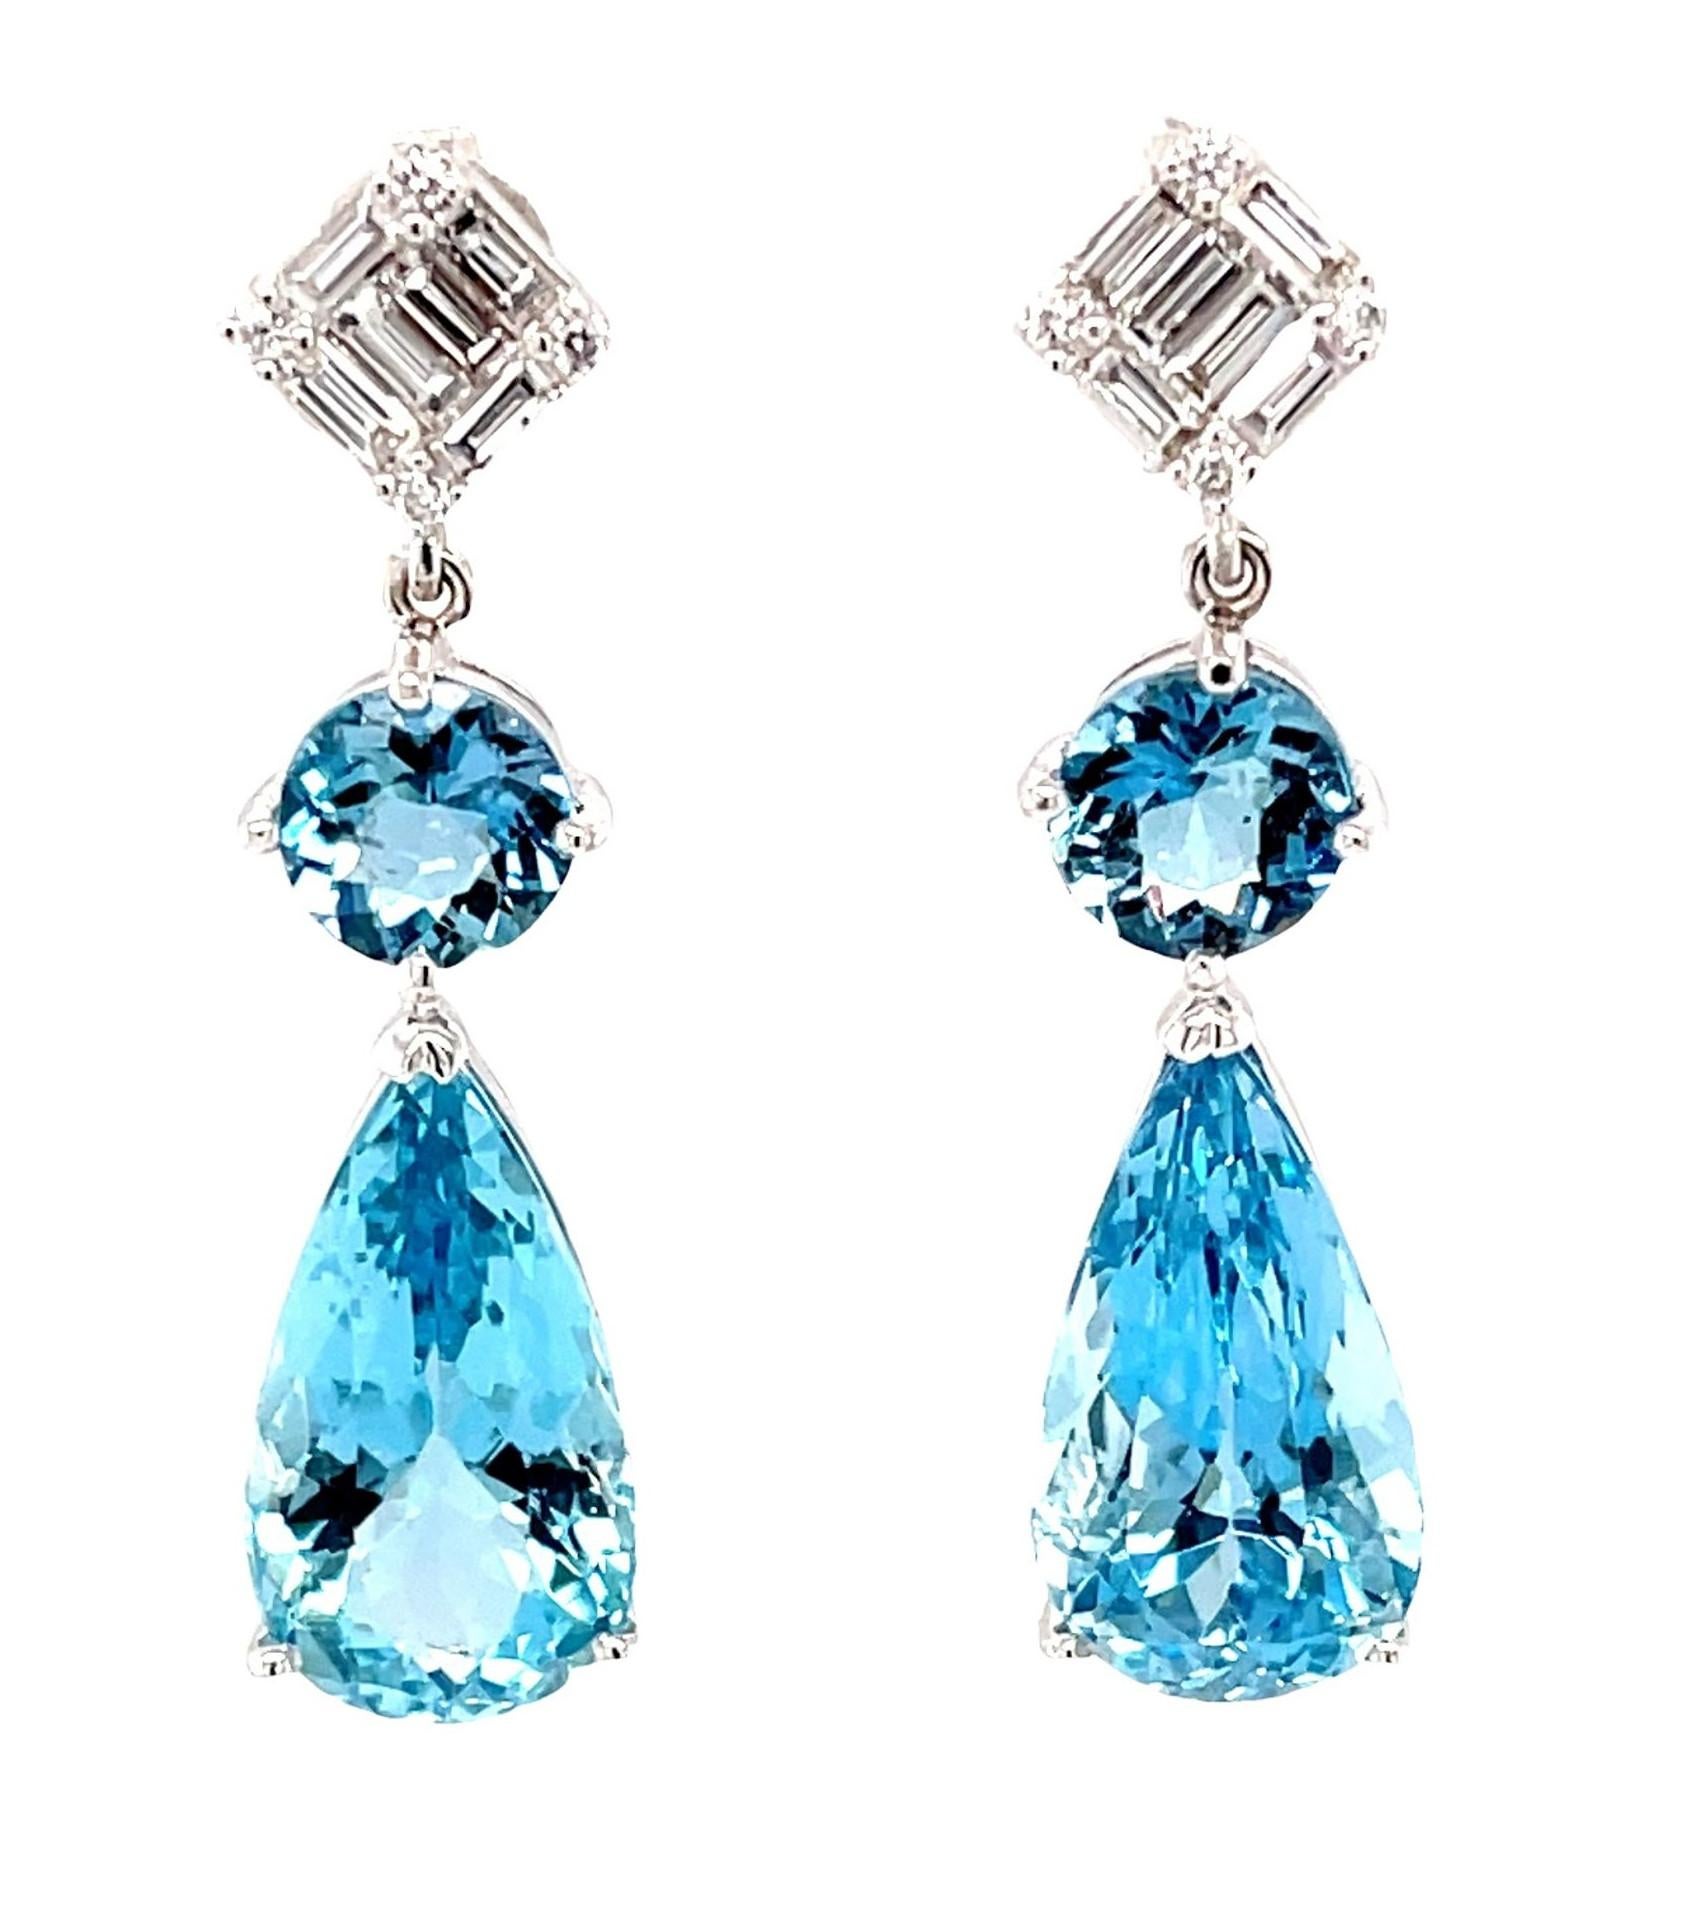 These exquisitely handcrafted aquamarine and diamond earrings definitely say 